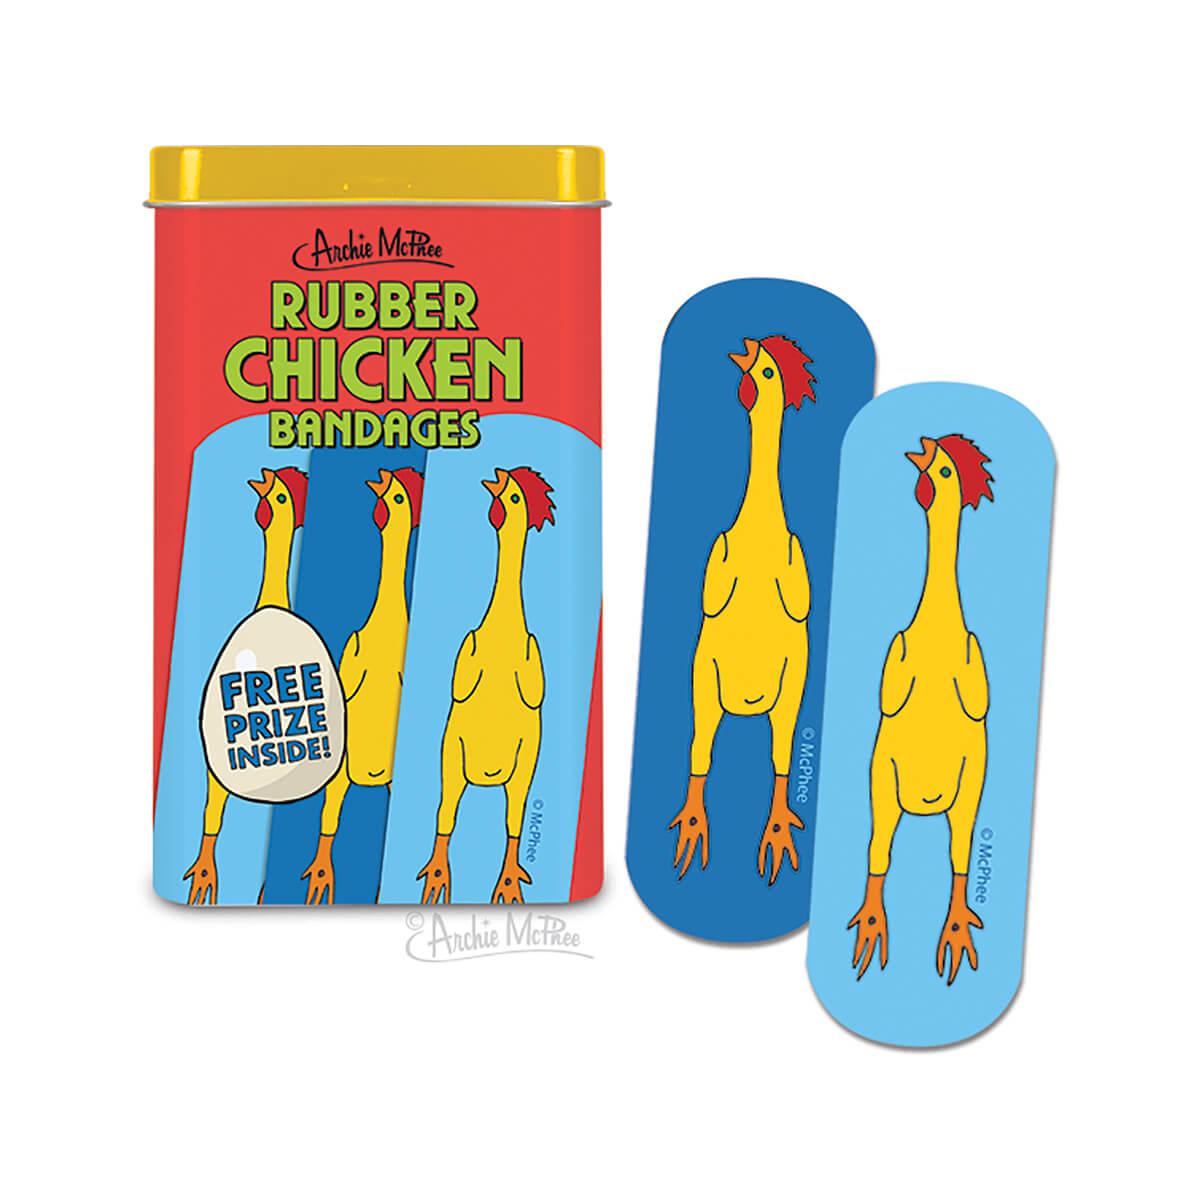  Rubber Chicken Bandages